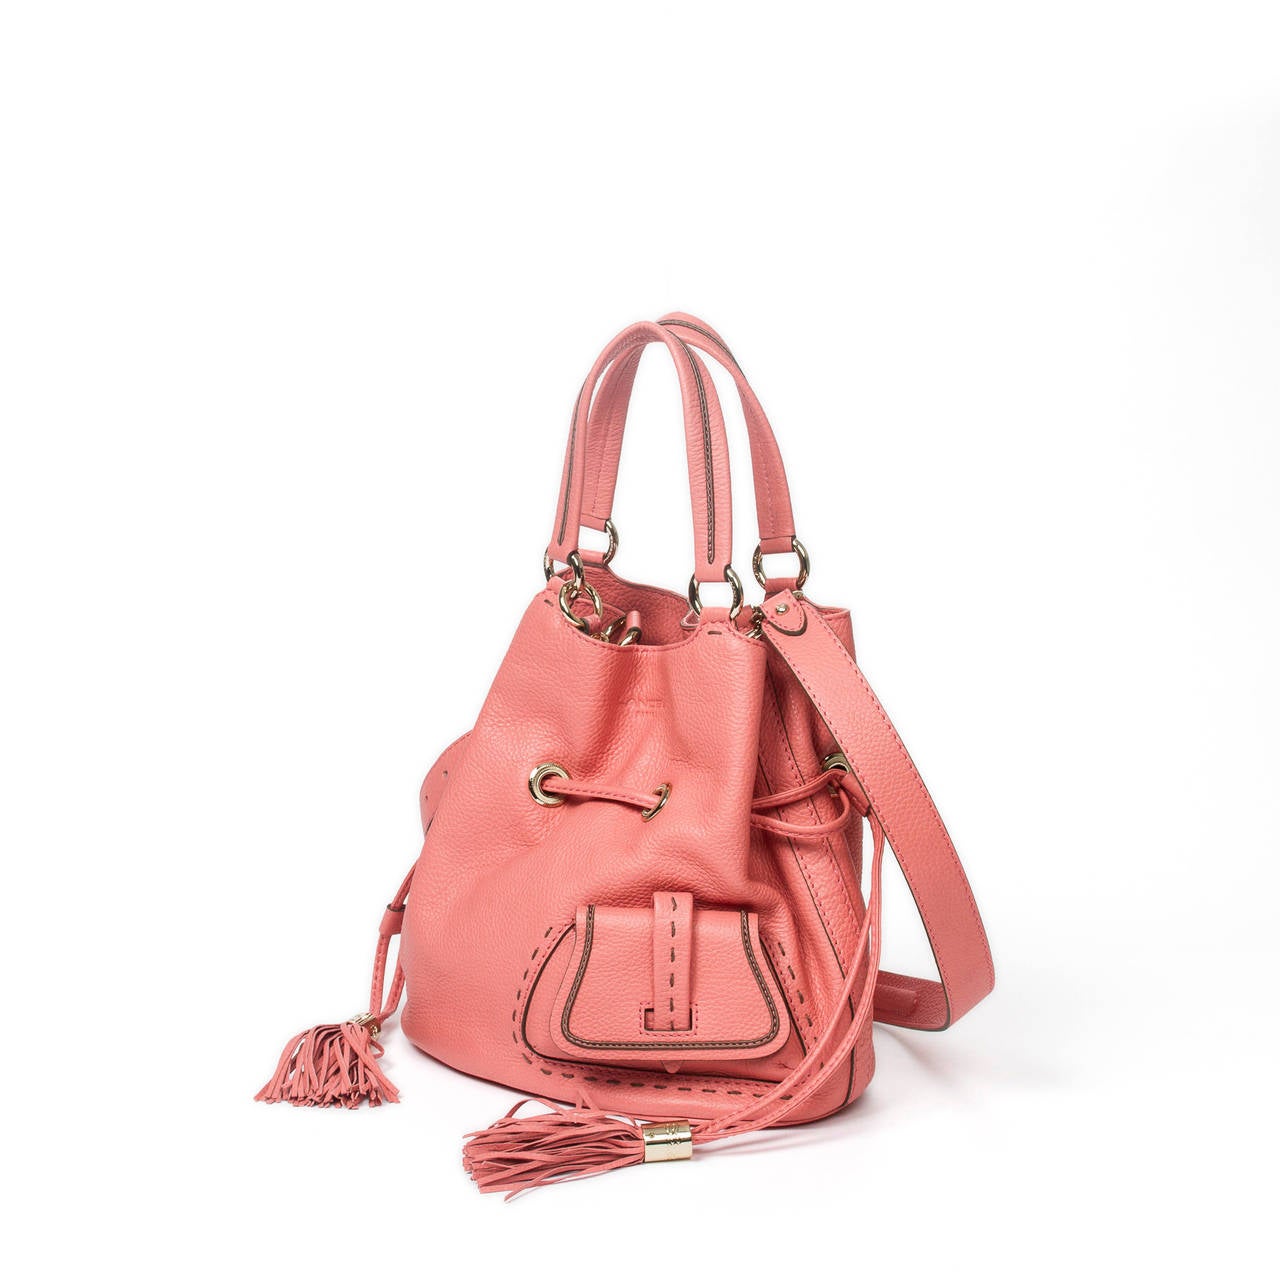 Handbag in pink grained leather with gold tone hardware and tassel. Close to new condition.